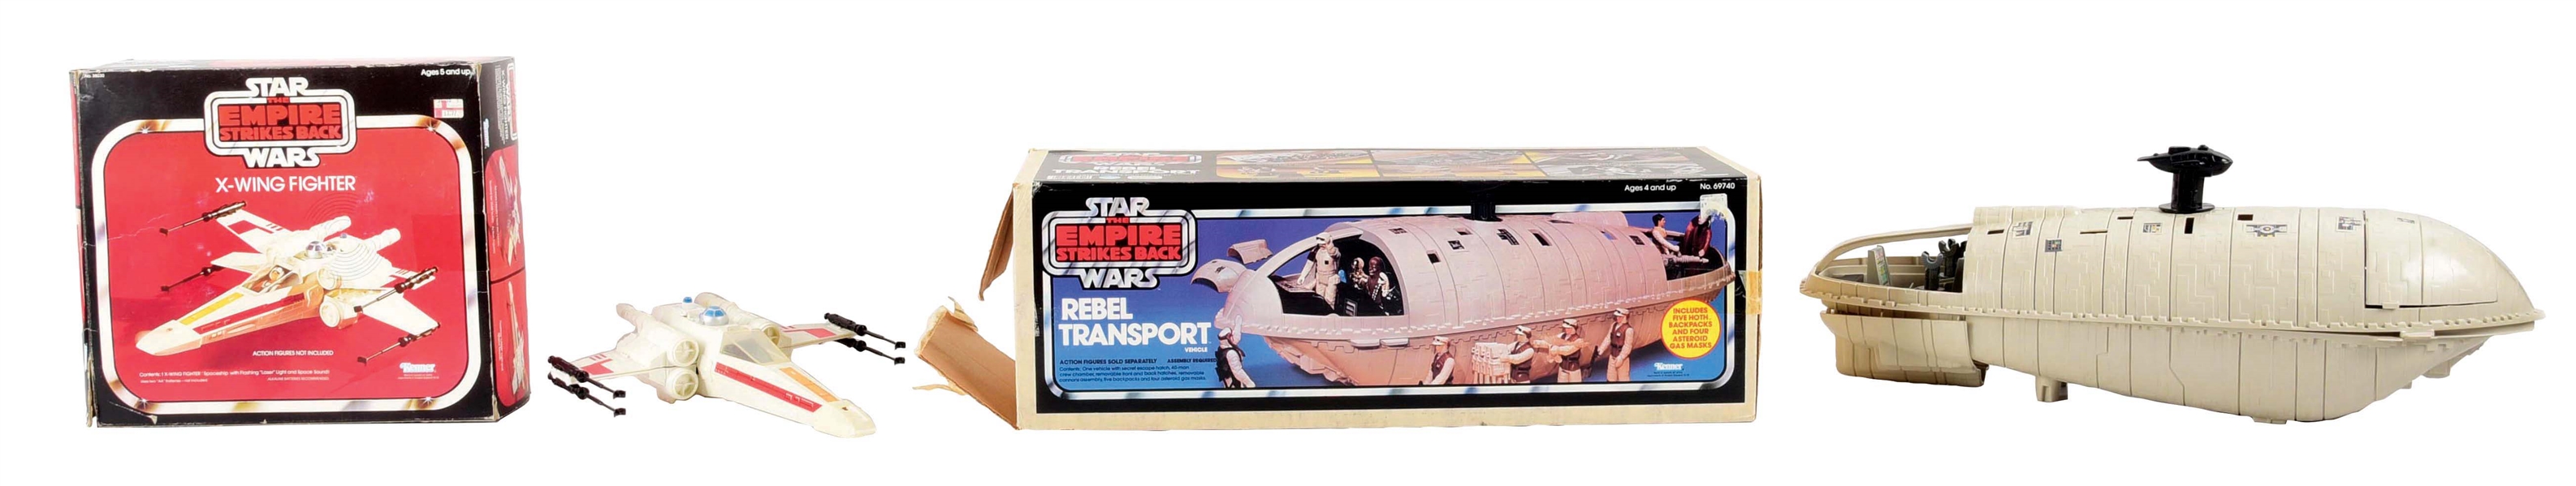 LOT OF 2: KENNER STAR WARS "THE EMPIRE STRIKES BACK" VEHICLE TOYS.